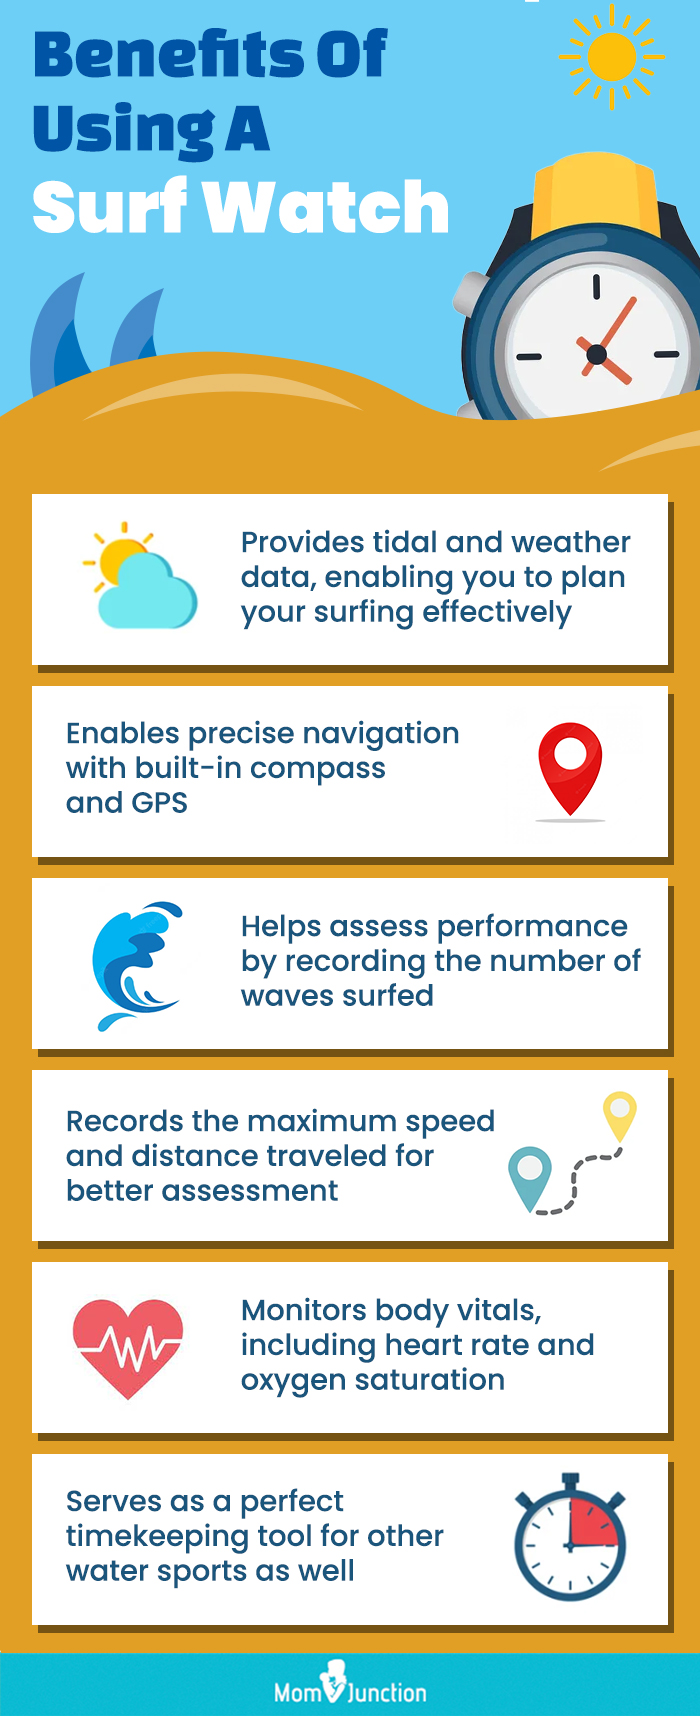 Benefits Of Using A Surf Watch(infographic)